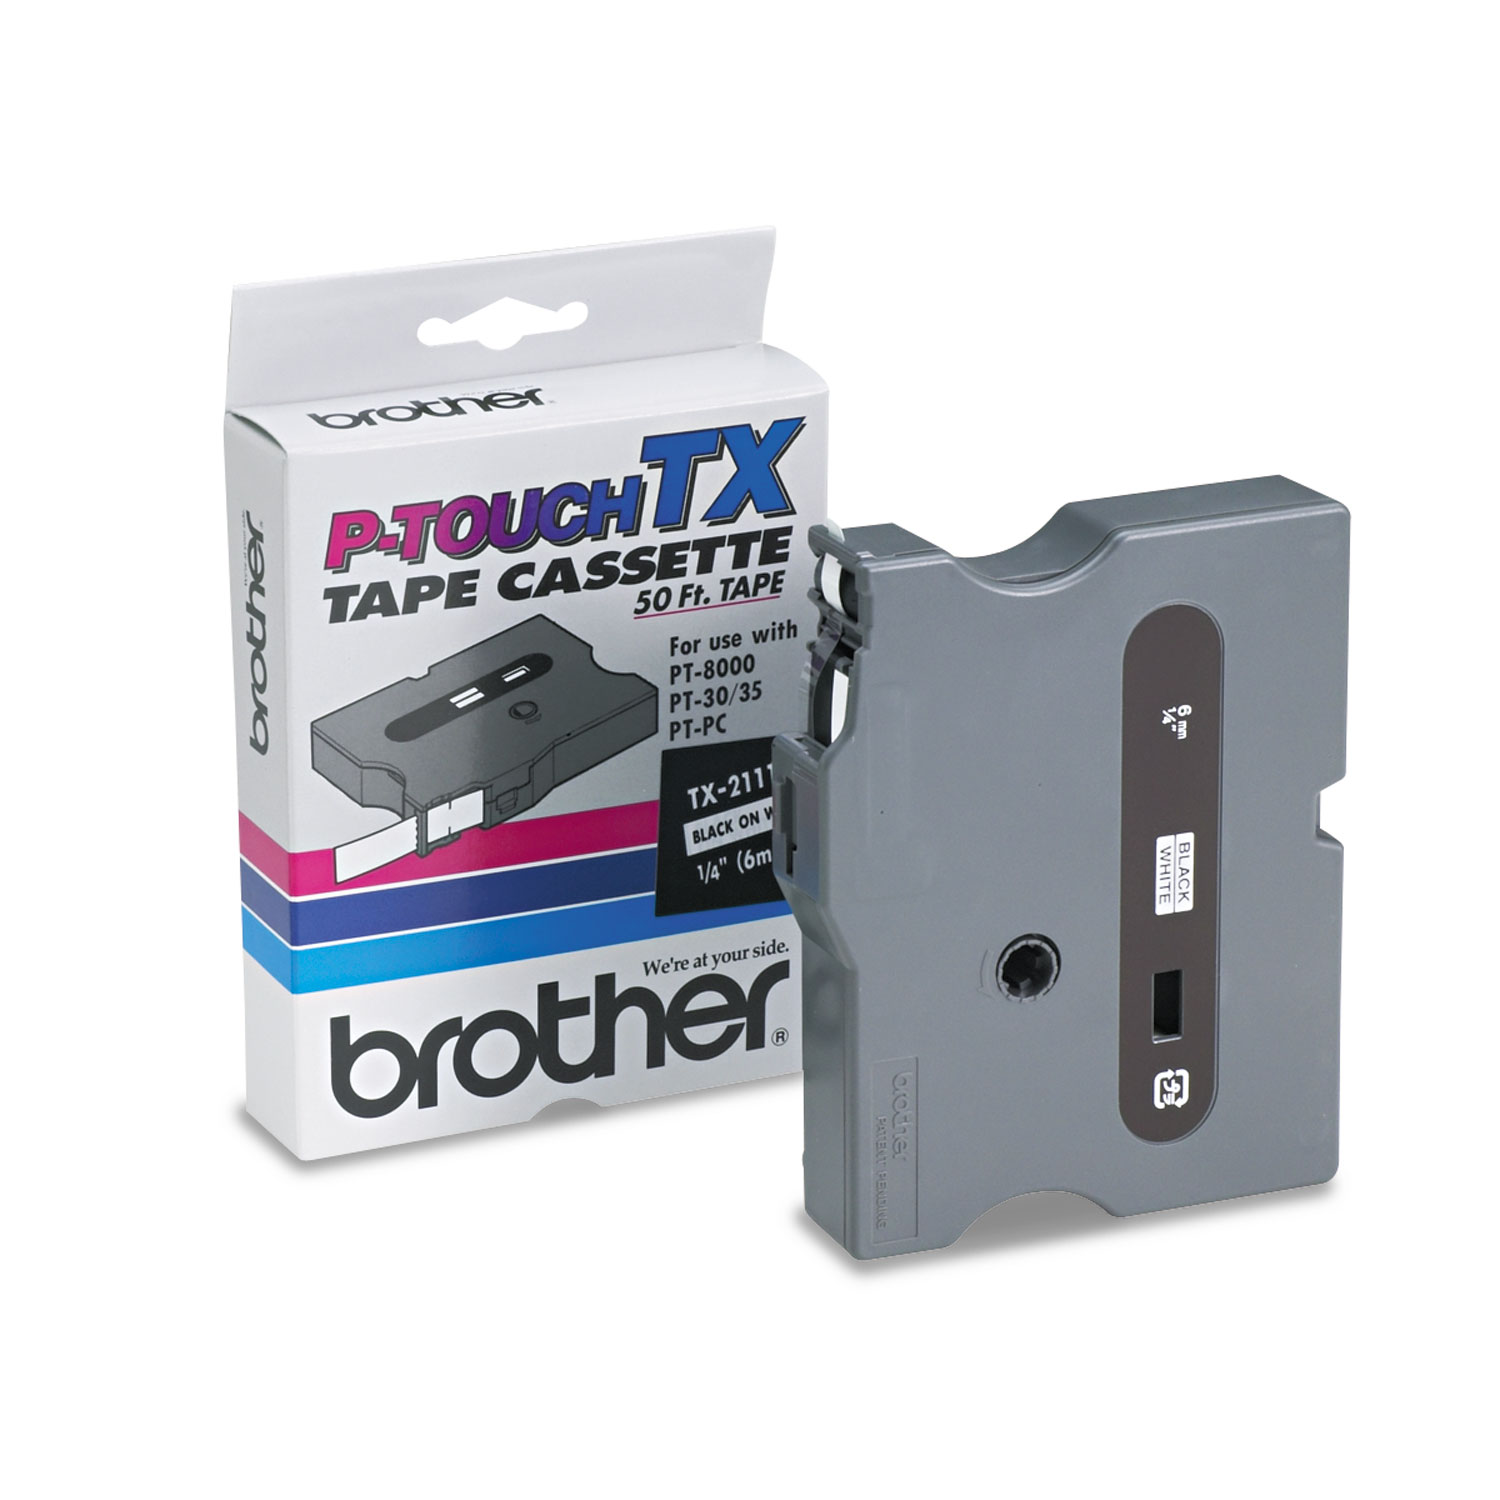  Brother P-Touch TX2111 TX Tape Cartridge for PT-8000, PT-PC, PT-30/35, 0.23 x 50 ft, Black on White (BRTTX2111) 